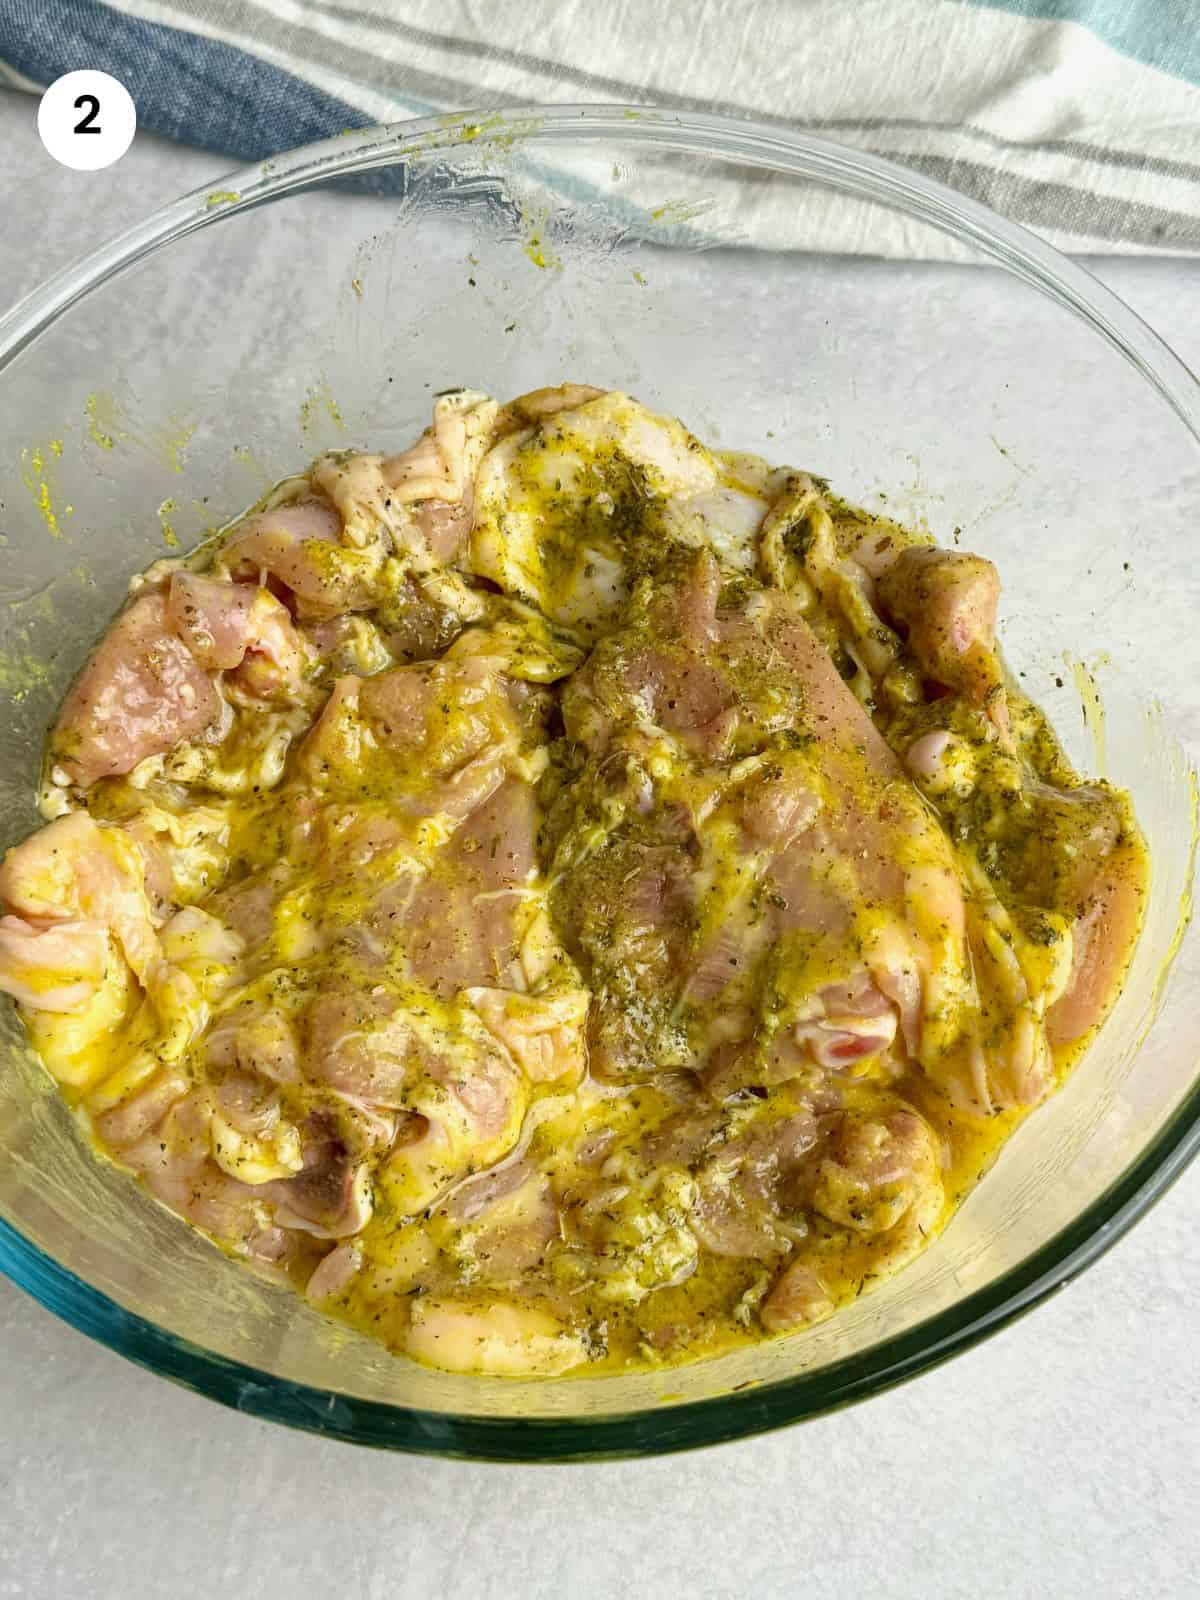 Marinated chicken in a bowl.